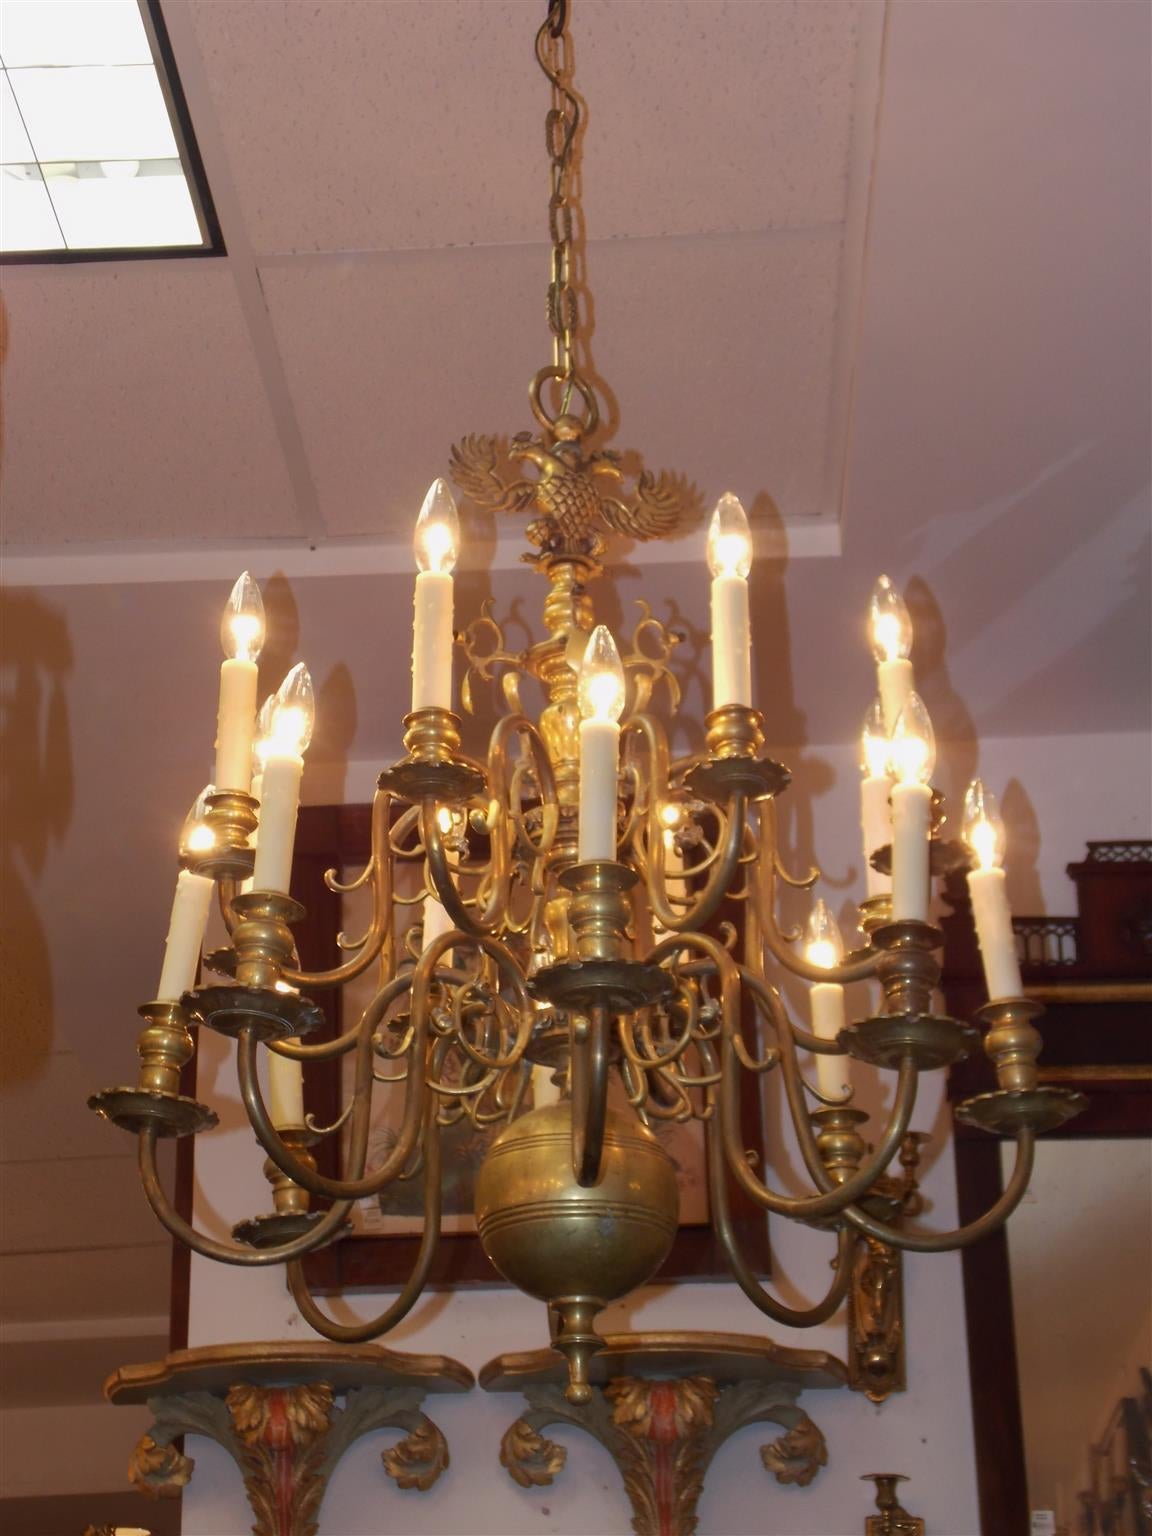 Prussian brass two-tiered sixteen-light chandelier with double eagle medallion, bulbous turned and ringed center column, scrolled arms with original bobeches, and terminating with a lower urn finial. Originally candle powered and has been